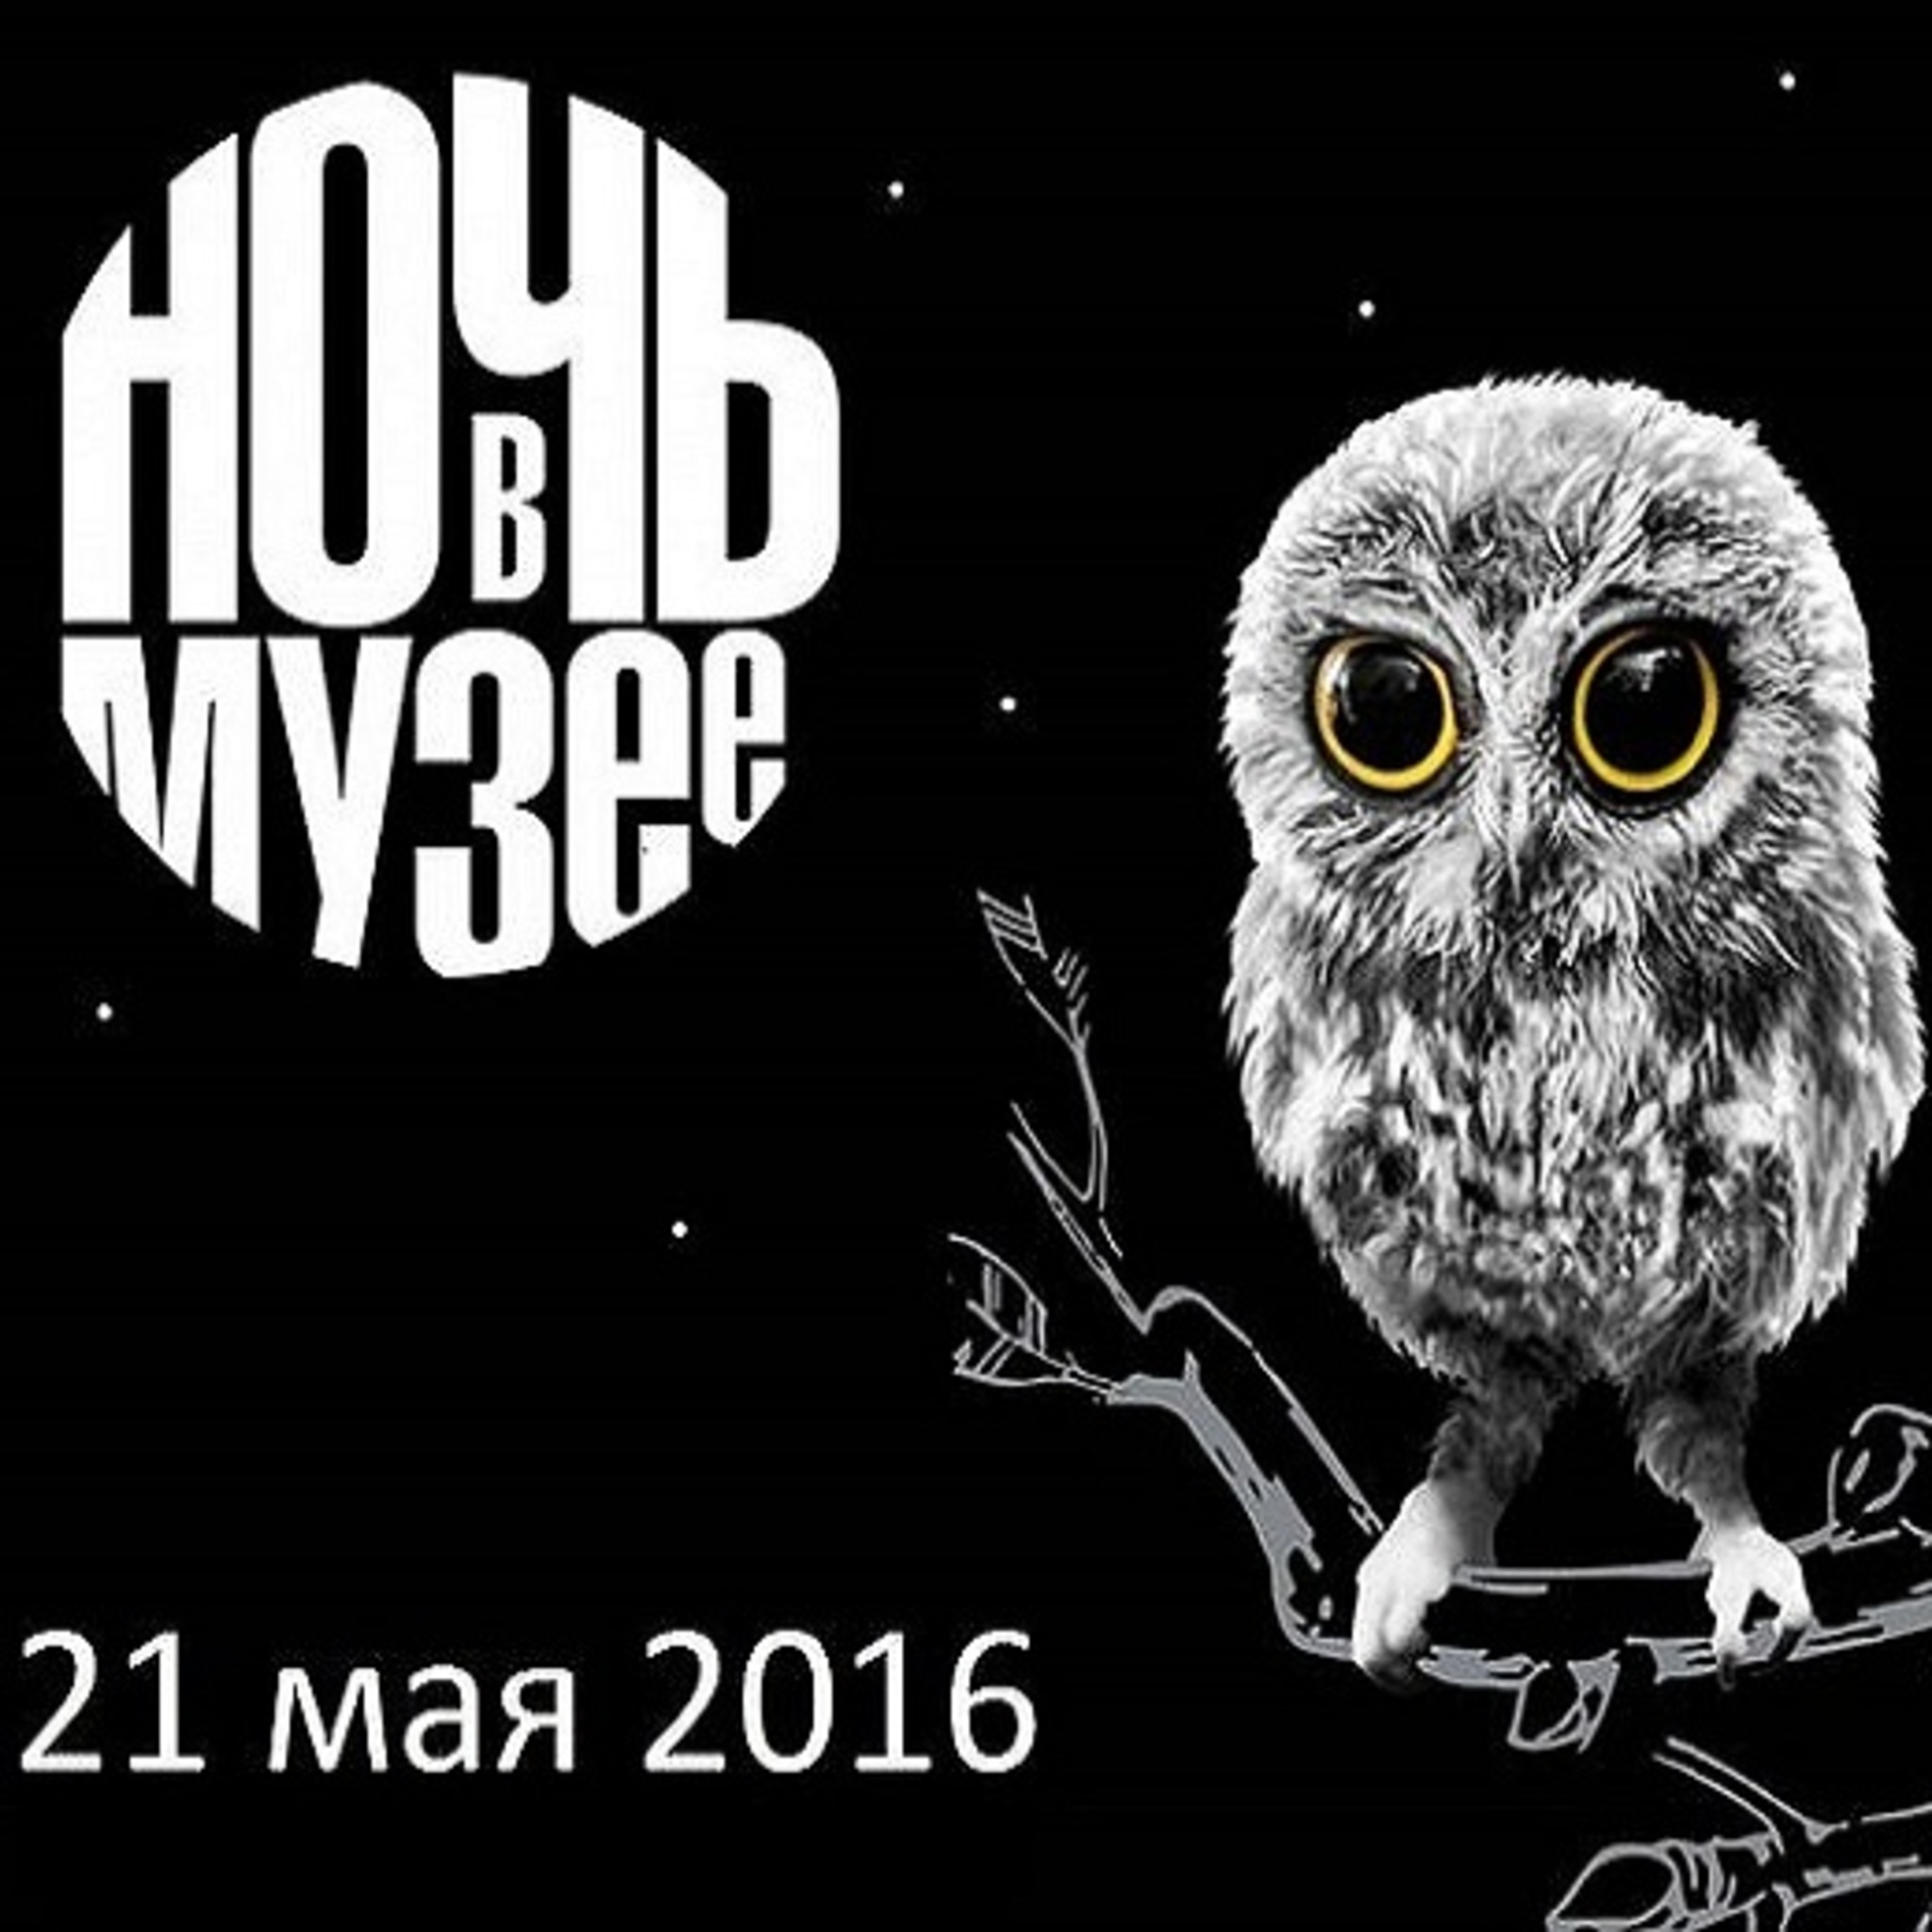 Night at the Museum 2016 Primorye State picture gallery